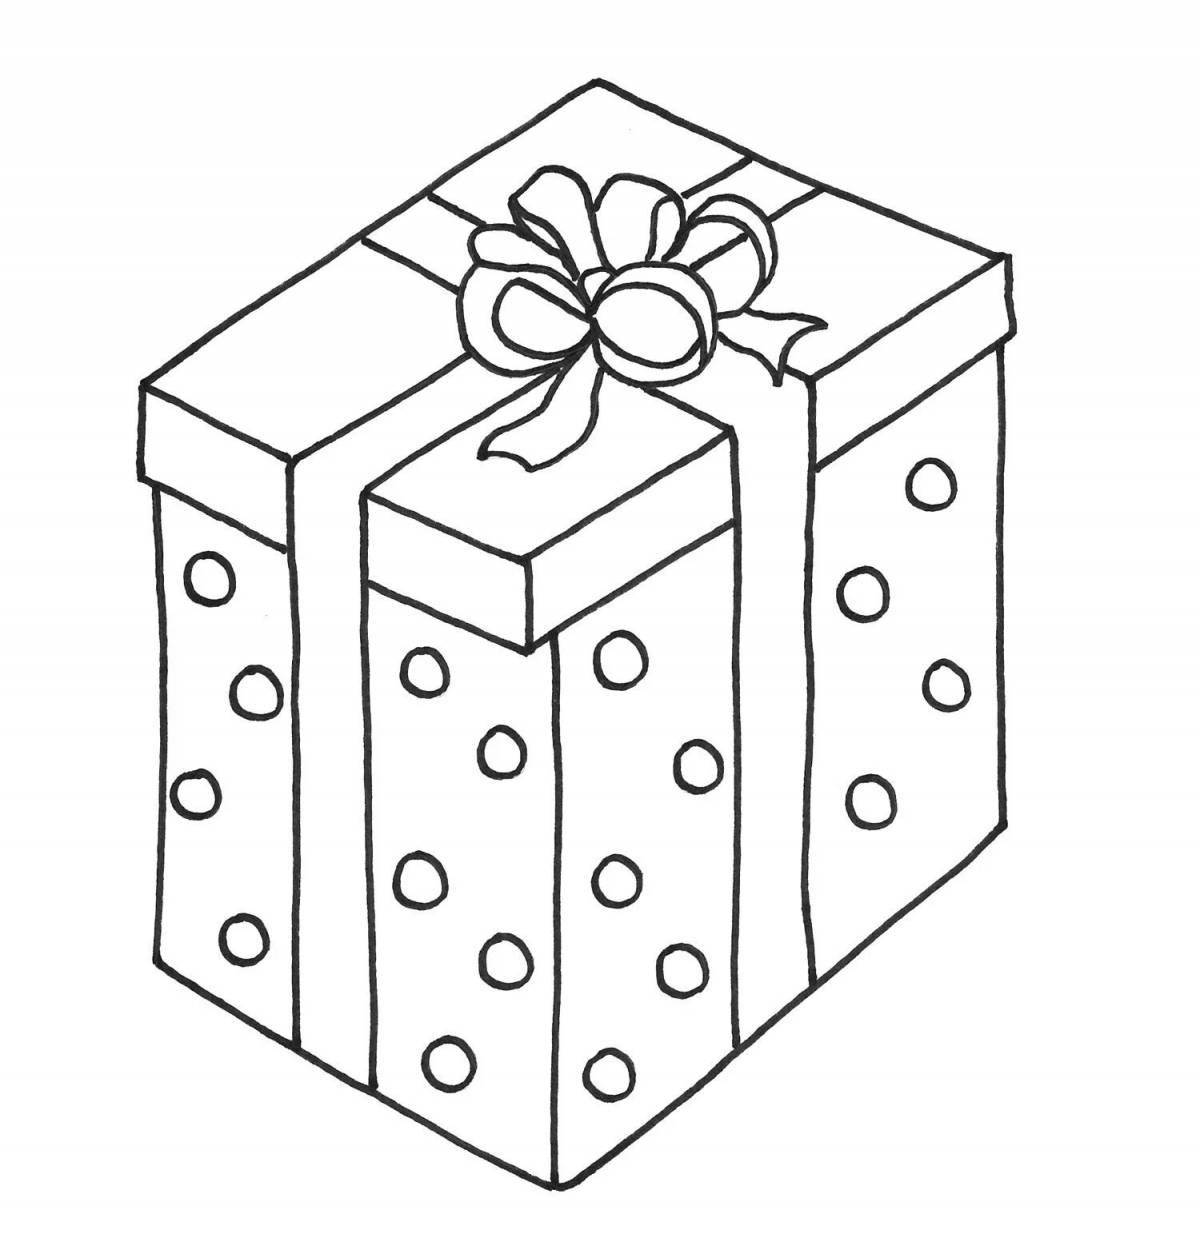 Lovely coloring page with great gift